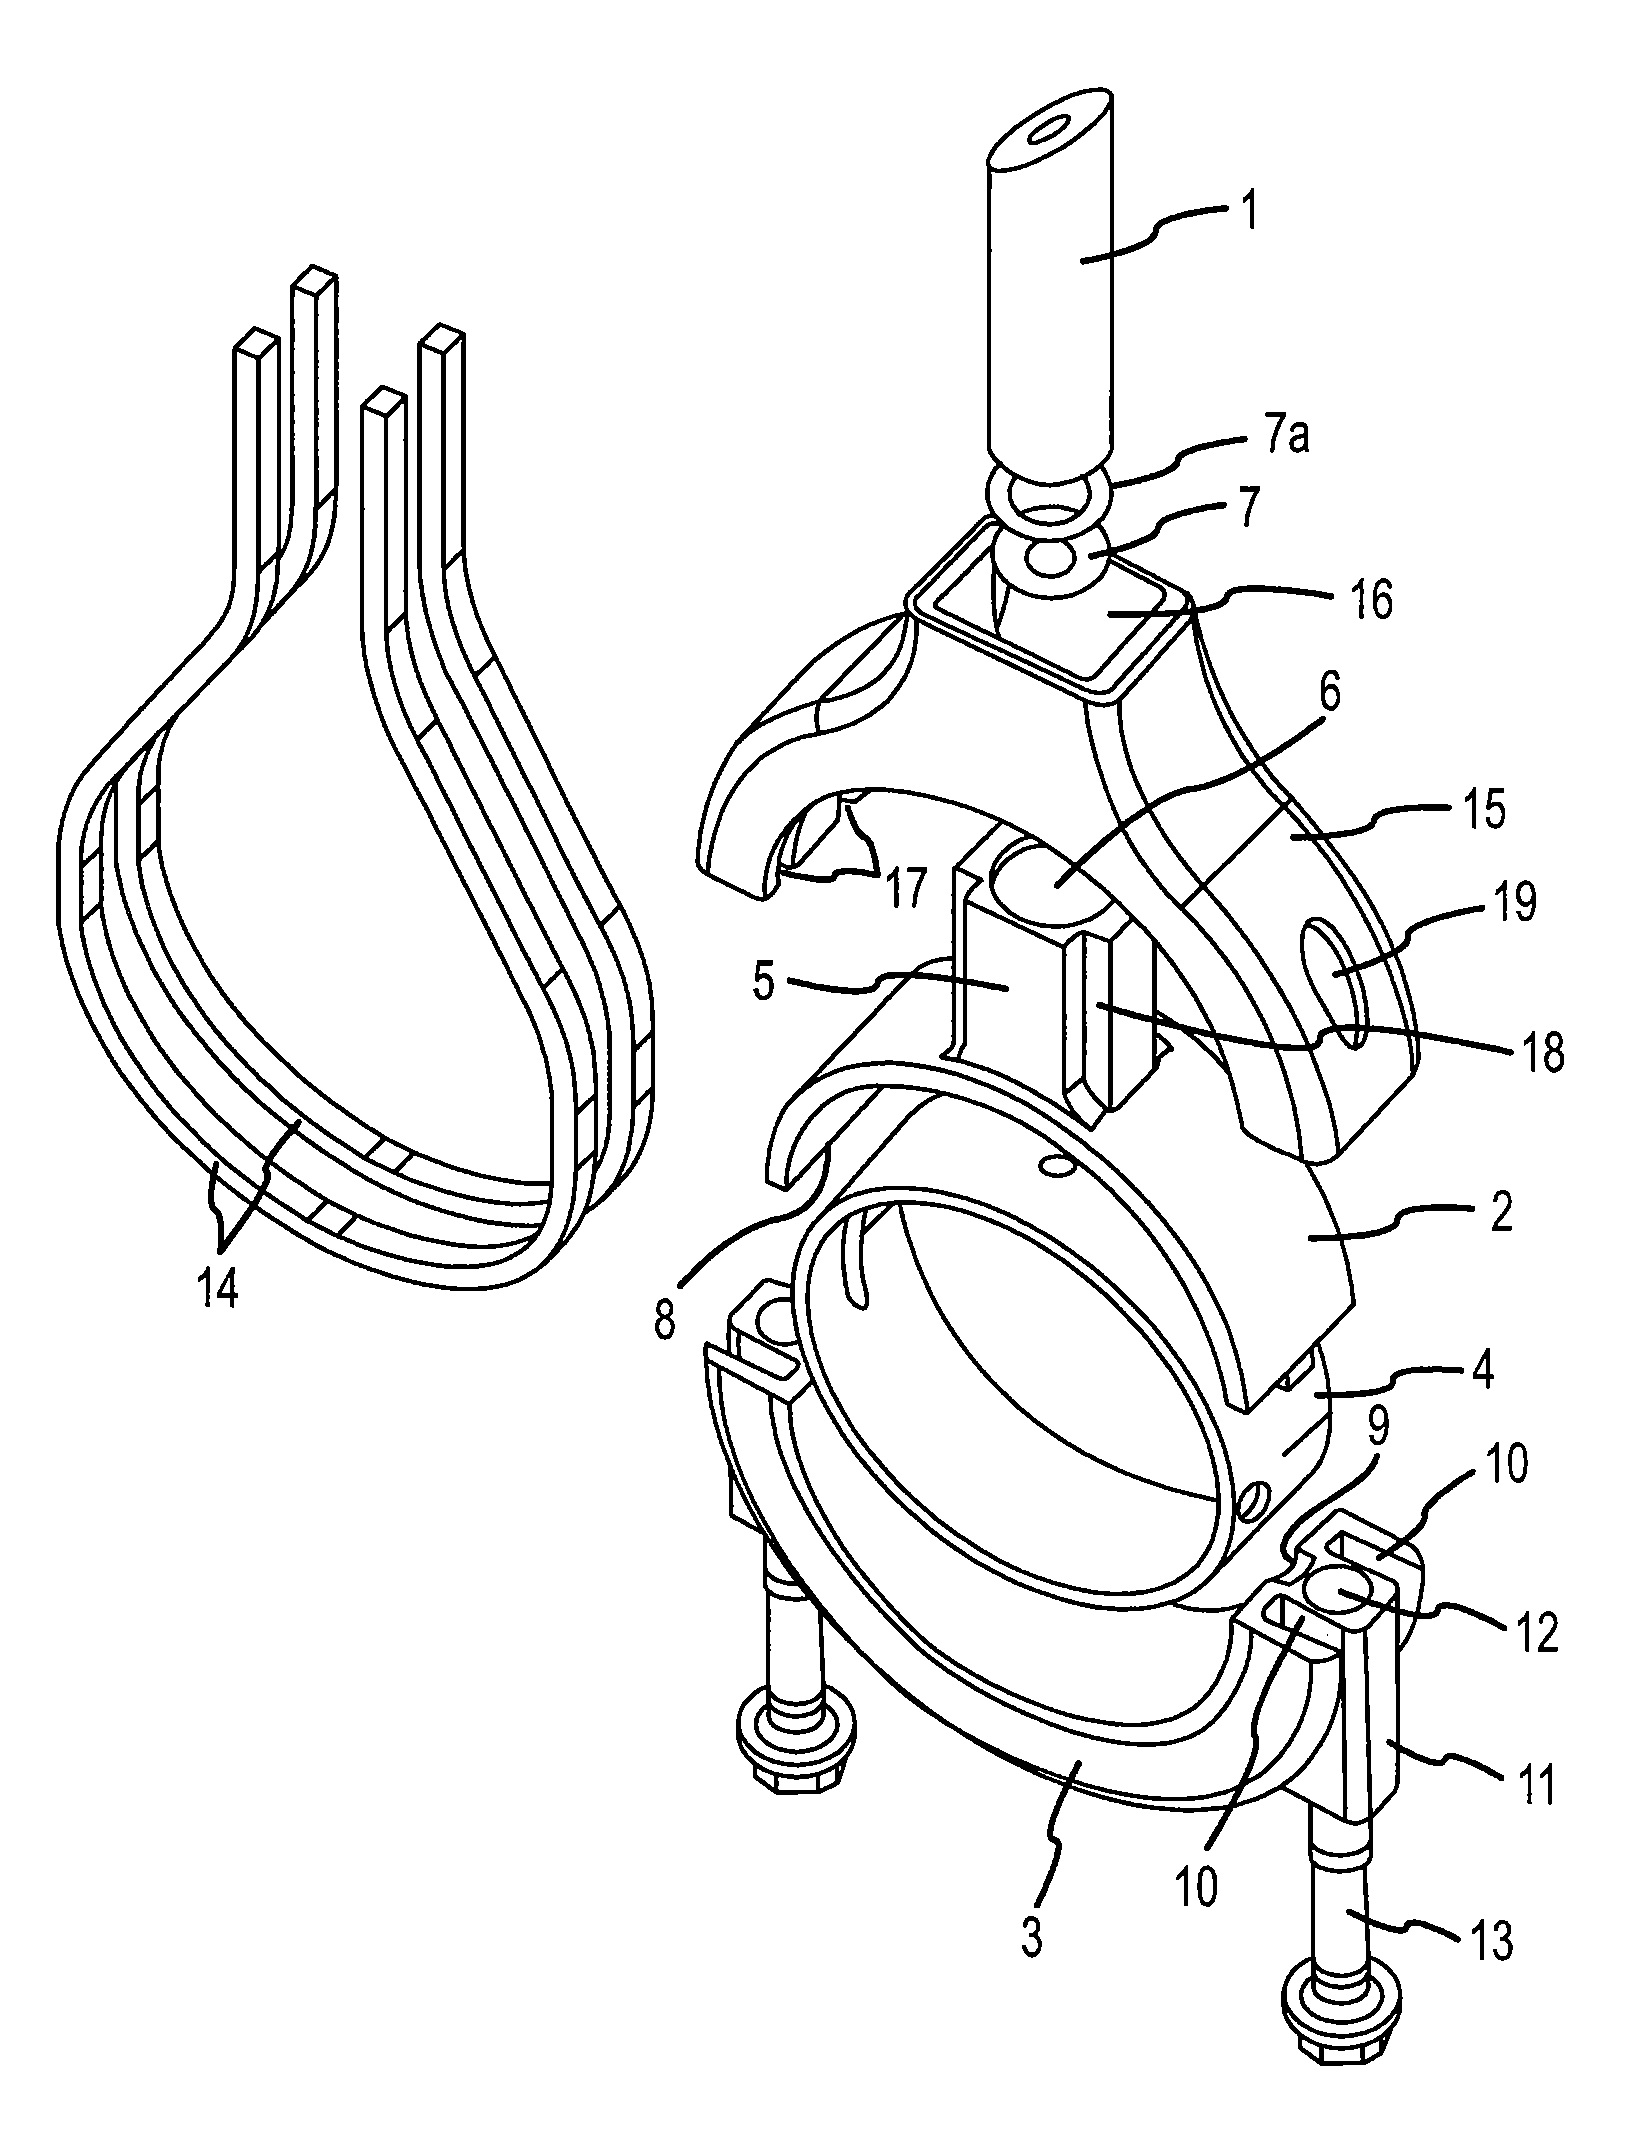 Connecting rod for an internal combustion engine